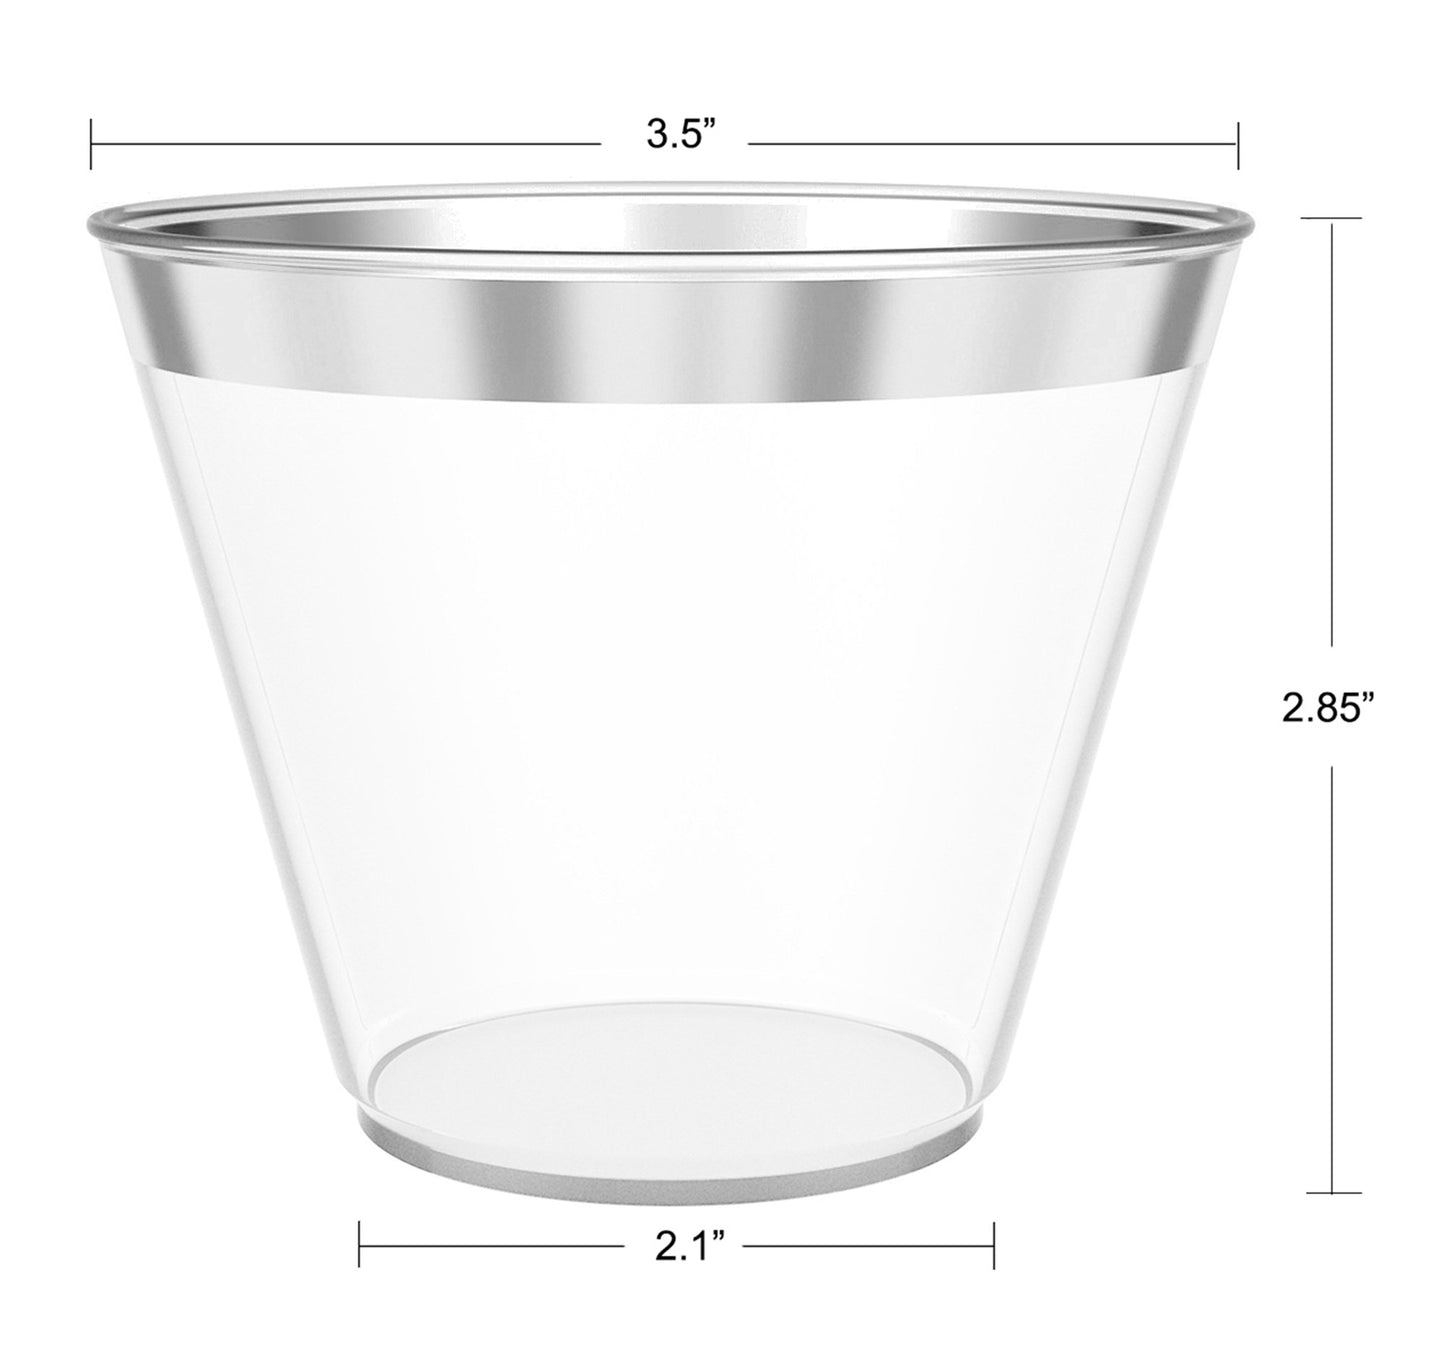 JL Prime 100 Silver Plastic Cups, 9 Oz Heavy Duty Reusable Disposable Silver Rim Clear Plastic Cups, Old Fashioned Tumblers, Hard Plastic Drinking Cups for Party and Wedding